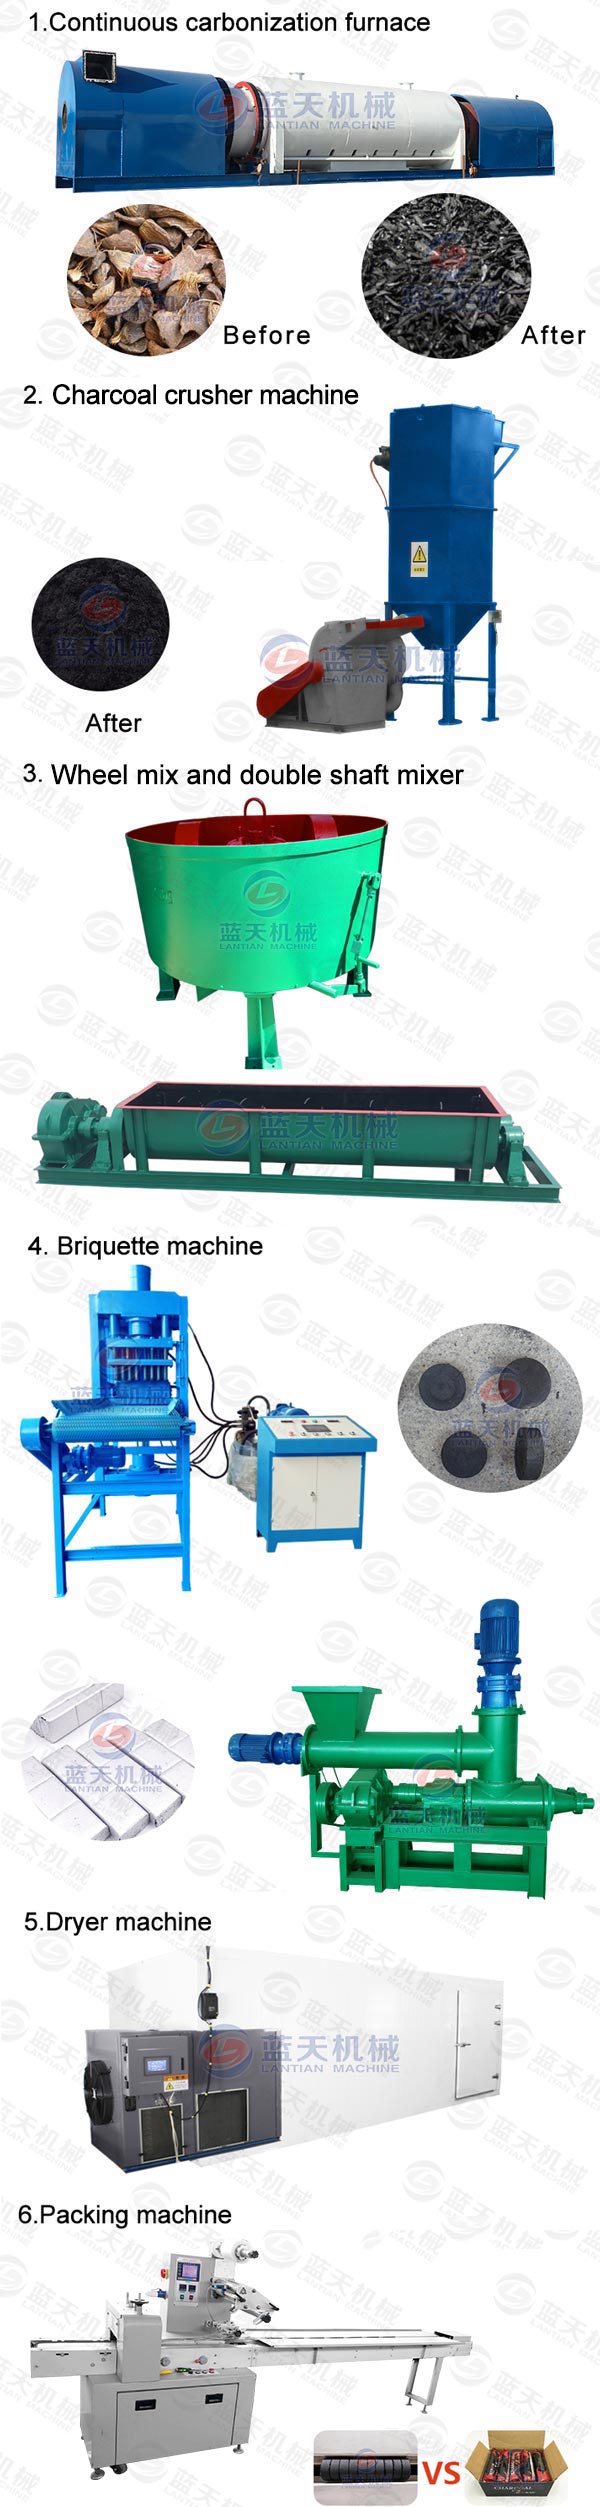 Product Line of Charcoal Crusher Machine